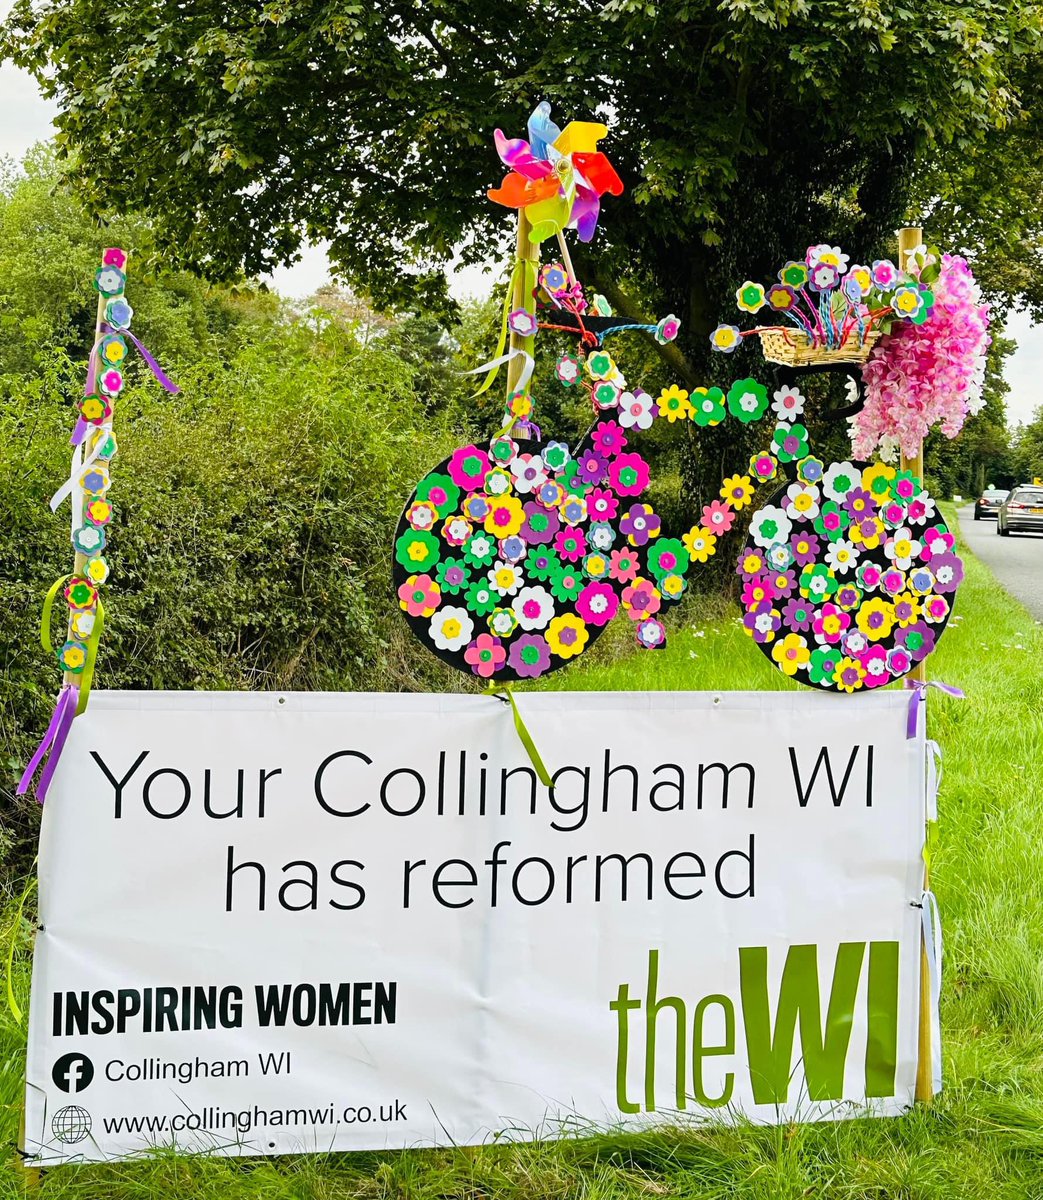 Now the tour of Britain reaches Nottinghamshire, some WI’s on the route of decorated, bicycles to welcome the cyclists to the region  🌼🌸🚴‍♀️🚴‍♀️thanks to Collingham WI for bright and colourful display. 🌸🌼
#tourofbritain @WILifemagazine @womensinstitute @bbcnottingham